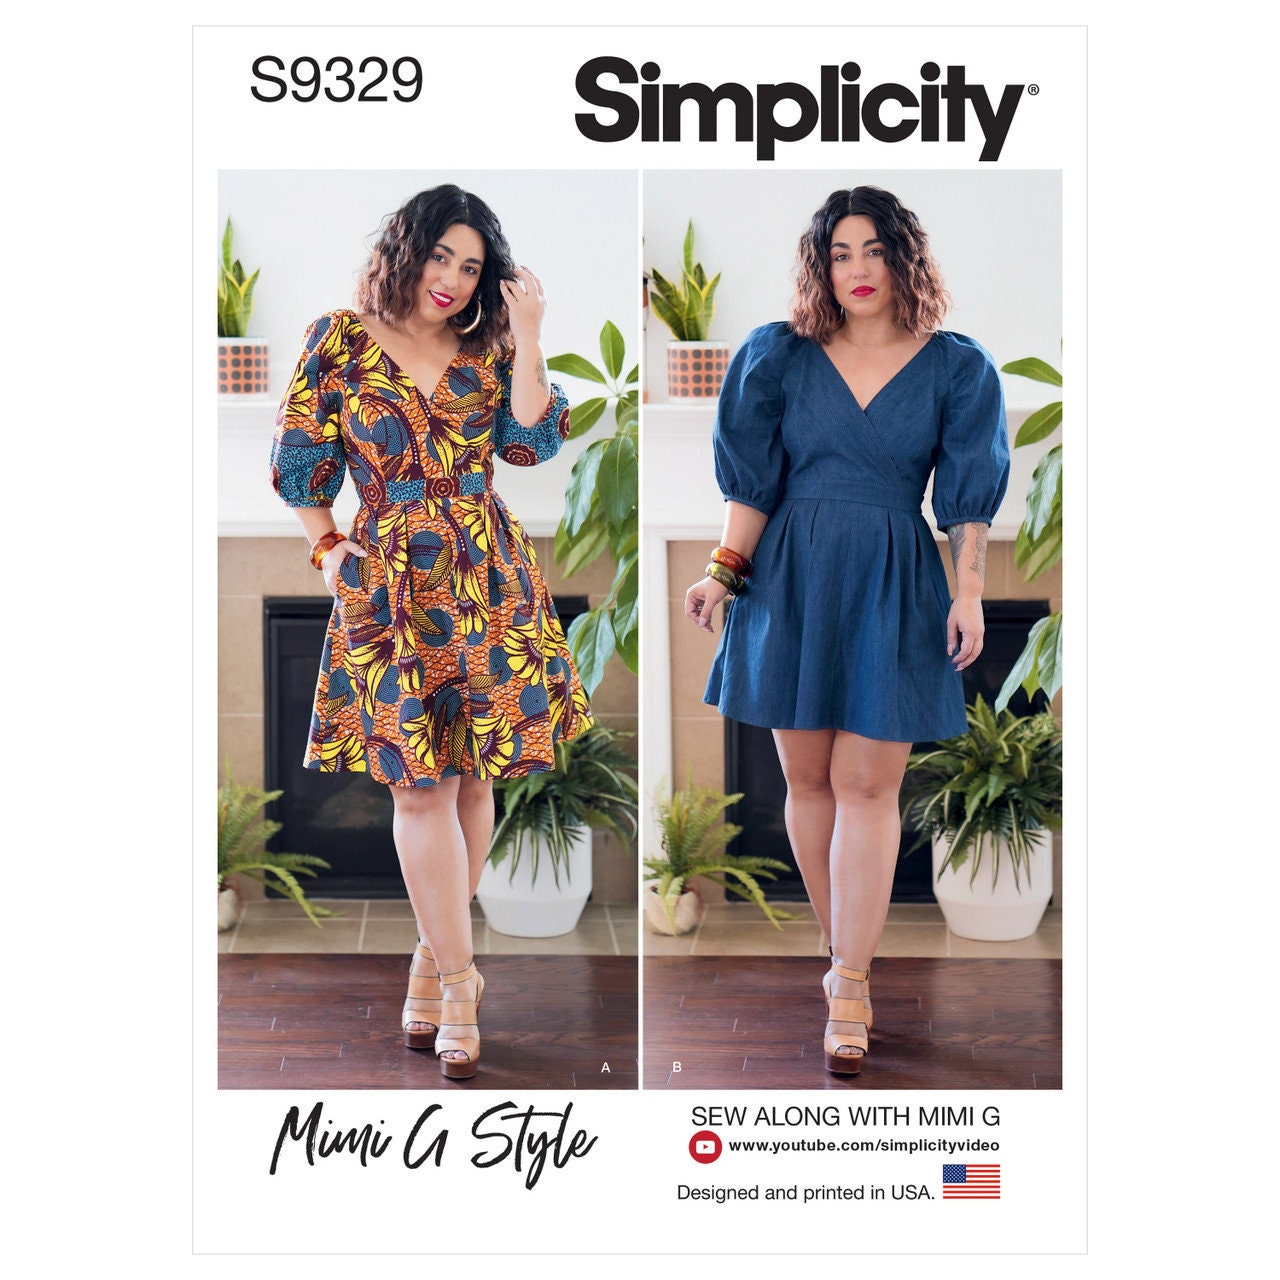 S9778, Misses' Knit Dress in Two Lengths by Mimi G Style